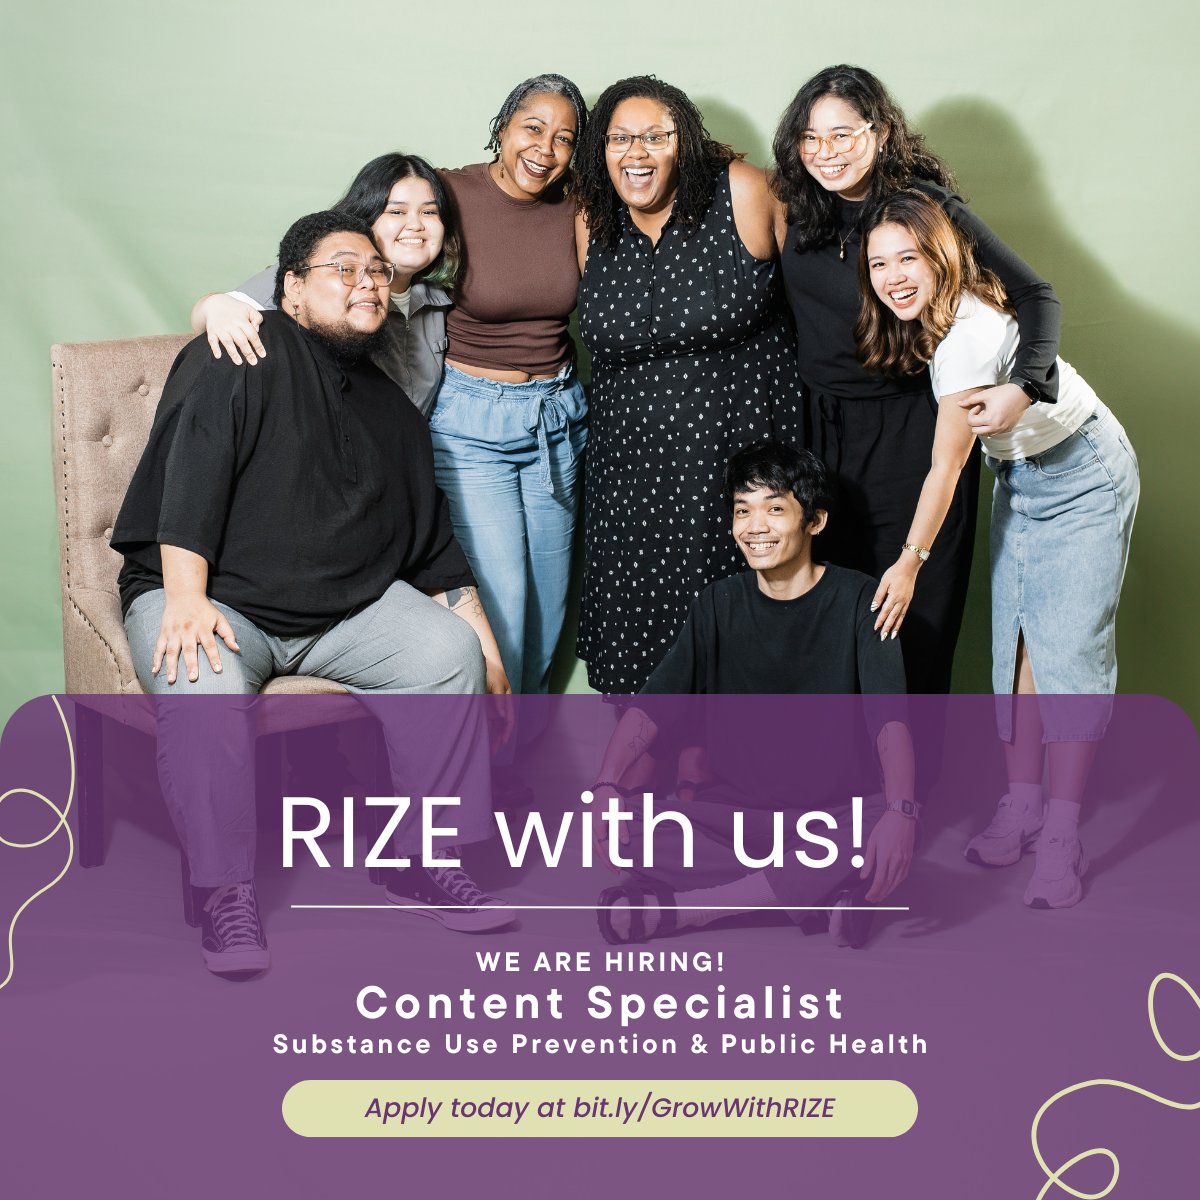 Join our dynamic team as a RIZE Content Specialist! Are you passionate about health equity and ready to craft compelling content? We want YOU!

Apply today at hubs.ly/Q02sZ_Wg0

#PublicHealth #Innovation #ContentSpecialist #NowHiring #Rize #RizeInfo